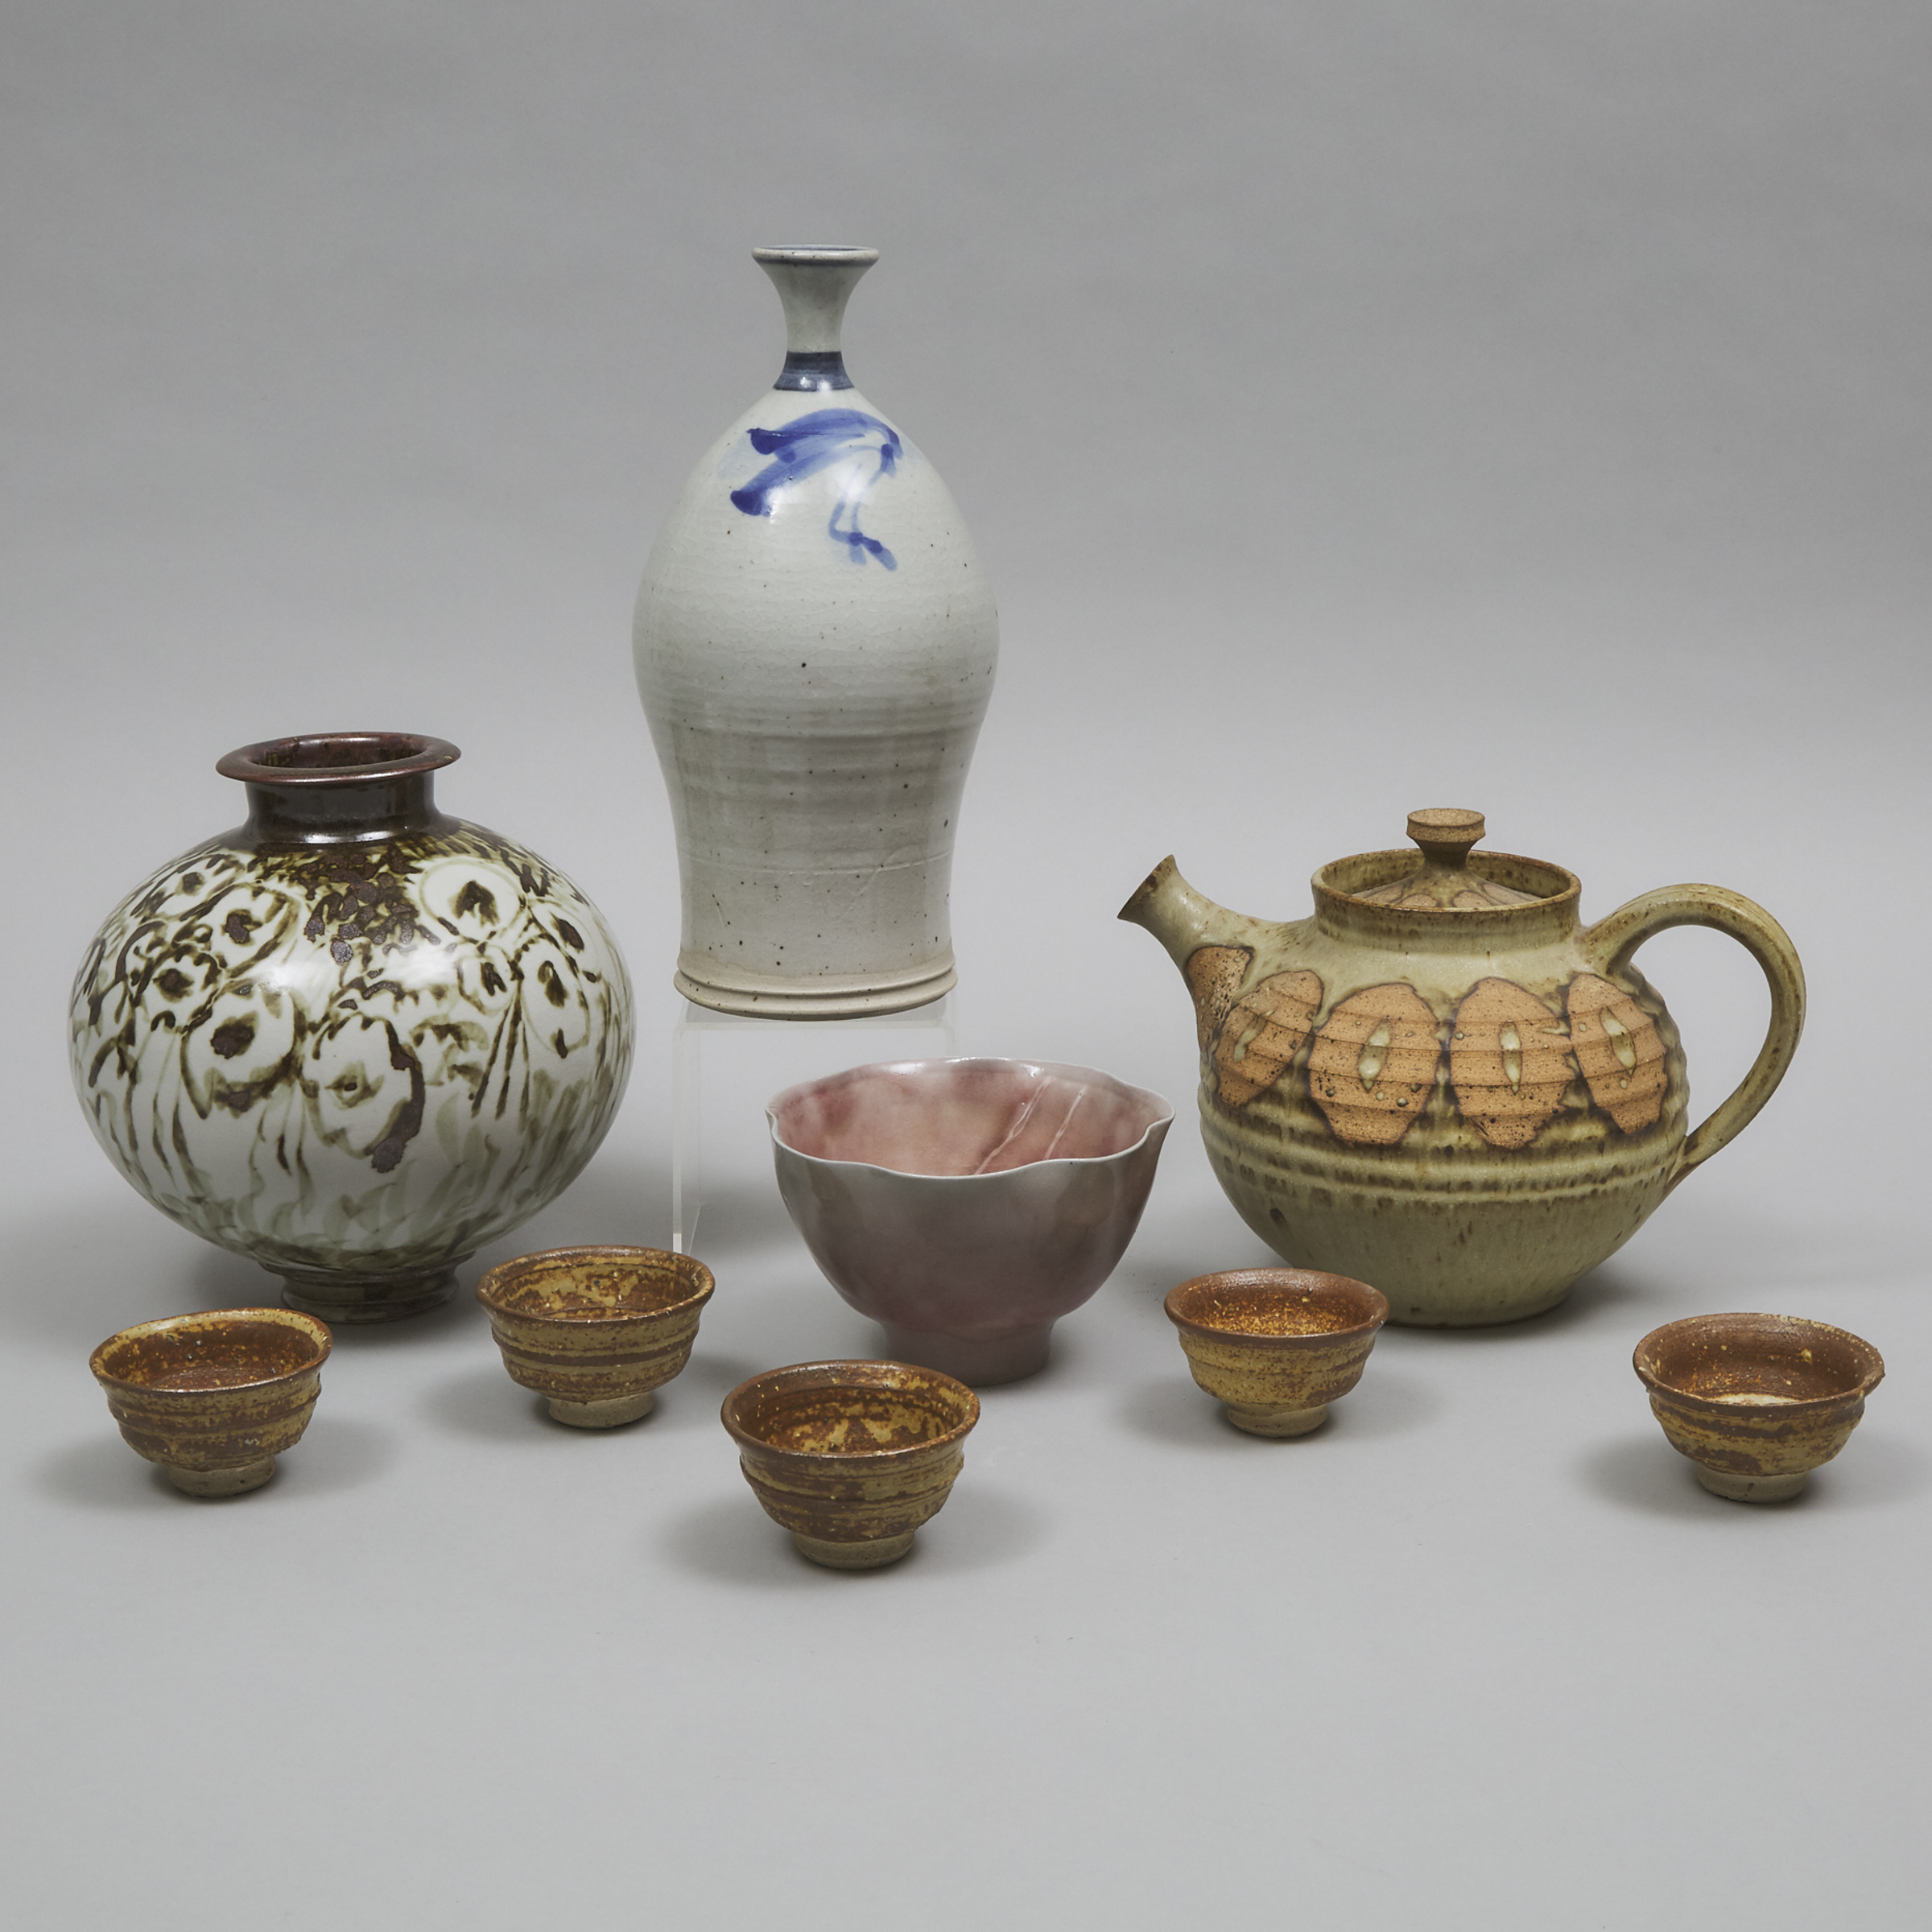 Group of North American Studio Ceramics, Jack Sures (Canadian, 1934-2018) and other potters